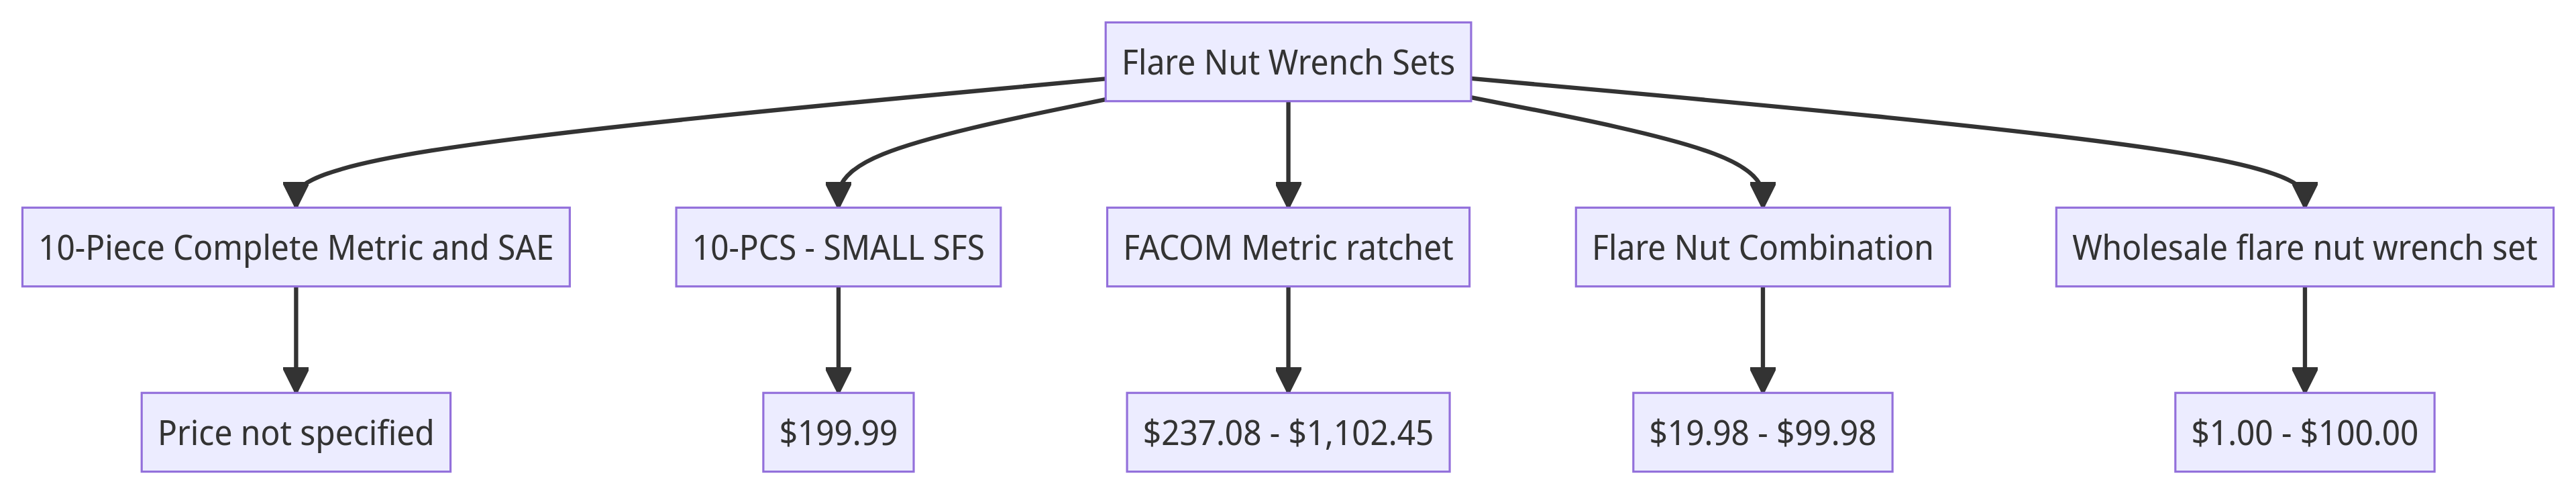 Flow Chart of Flare Nut Wrench Sets